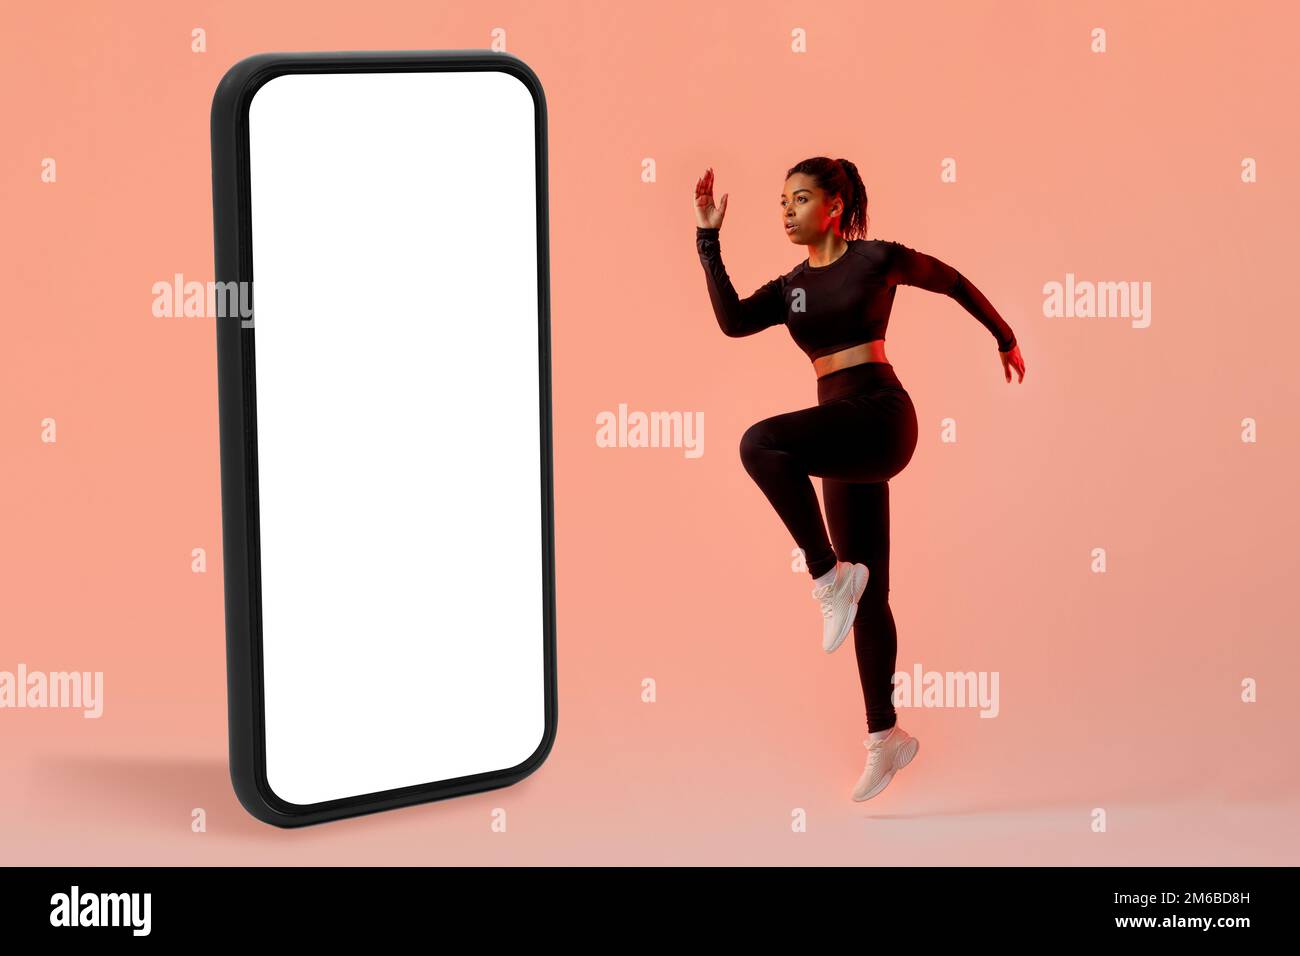 Workout application concept. Slim lady exercising near big cellphone, jumping in studio over neon background, mockup Stock Photo